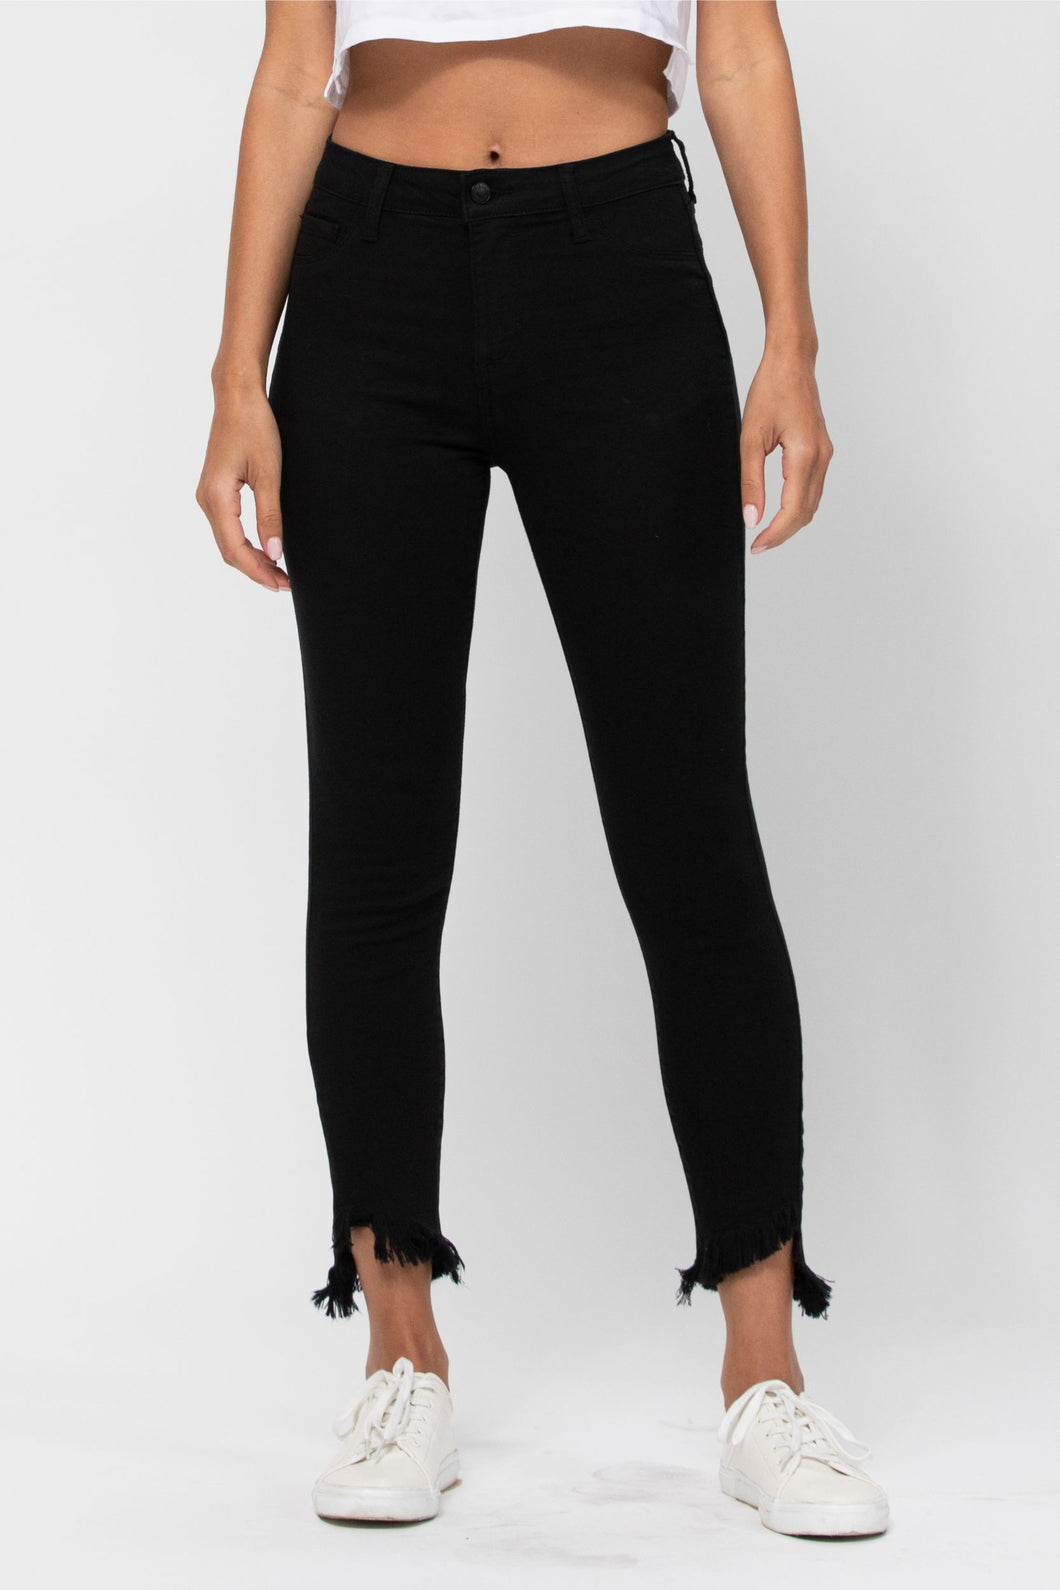 *Cello Teen Black Mid Rise Crop Skinny Jeans with Fray Hem